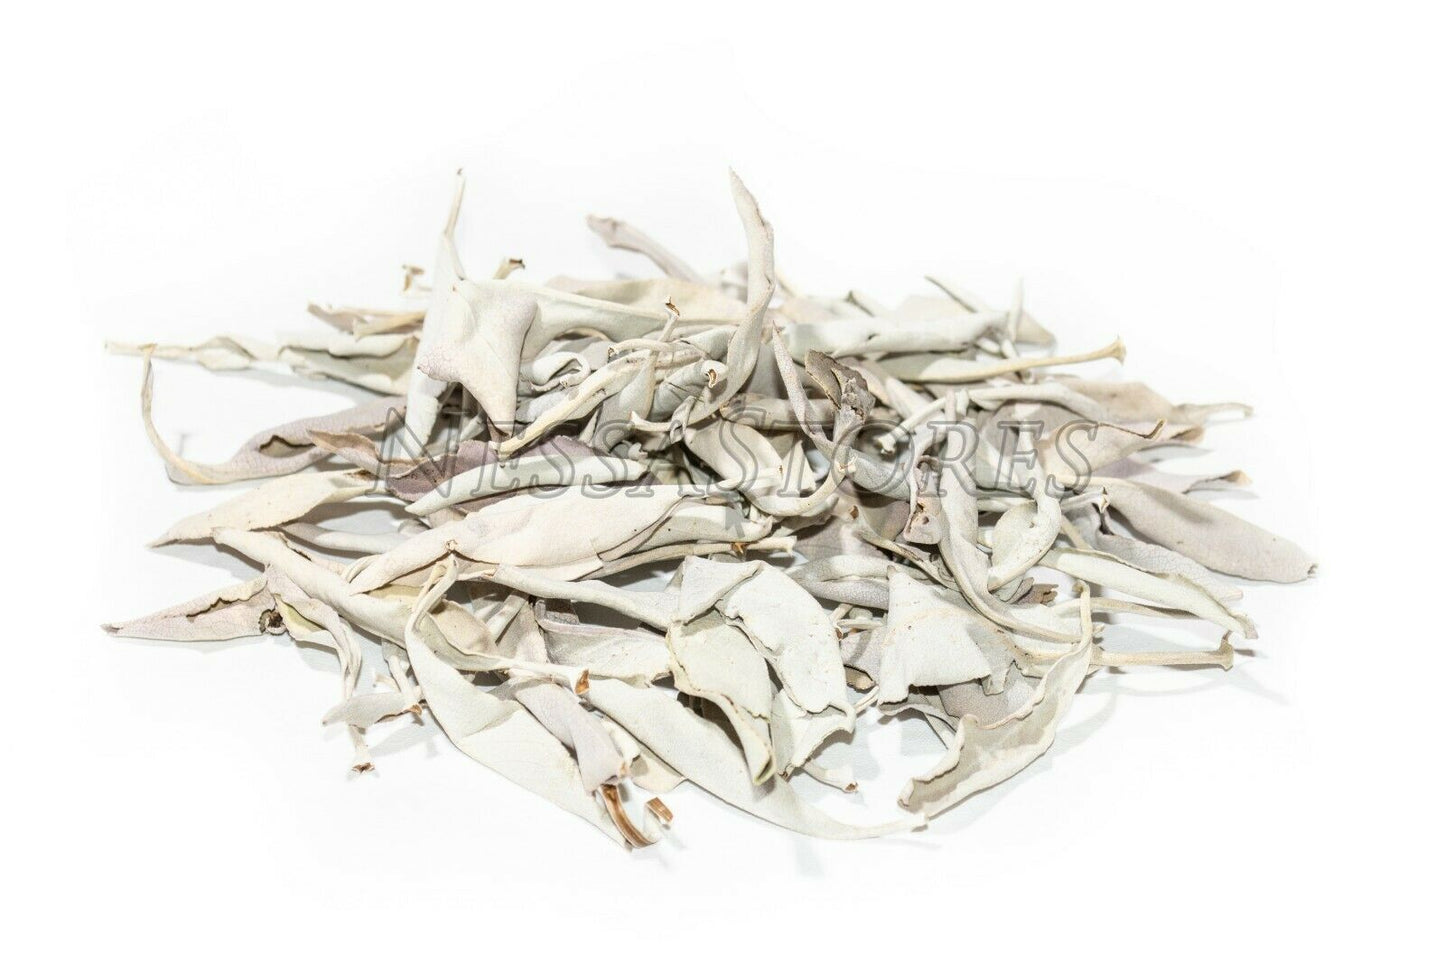 NessaStores California White Sage LEAVES ONLY Incense (1/4 lb) #JC-003